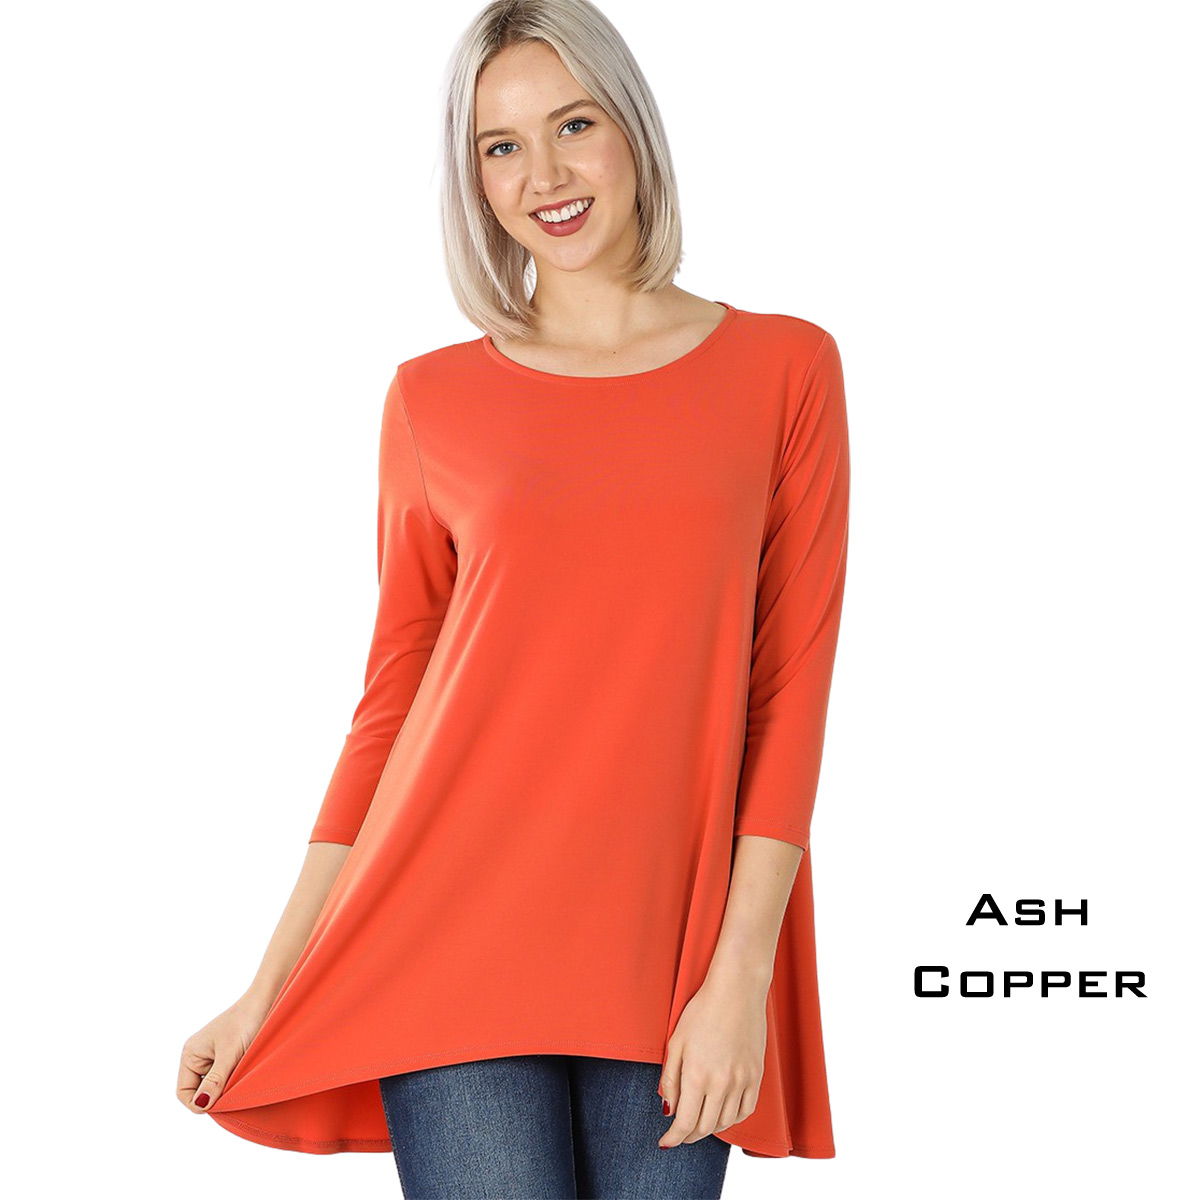 2367 - Ity High-Low 3/4 Sleeve Top ASH COPPER Ity High-Low 3/4 Sleeve Top 2367 - Small